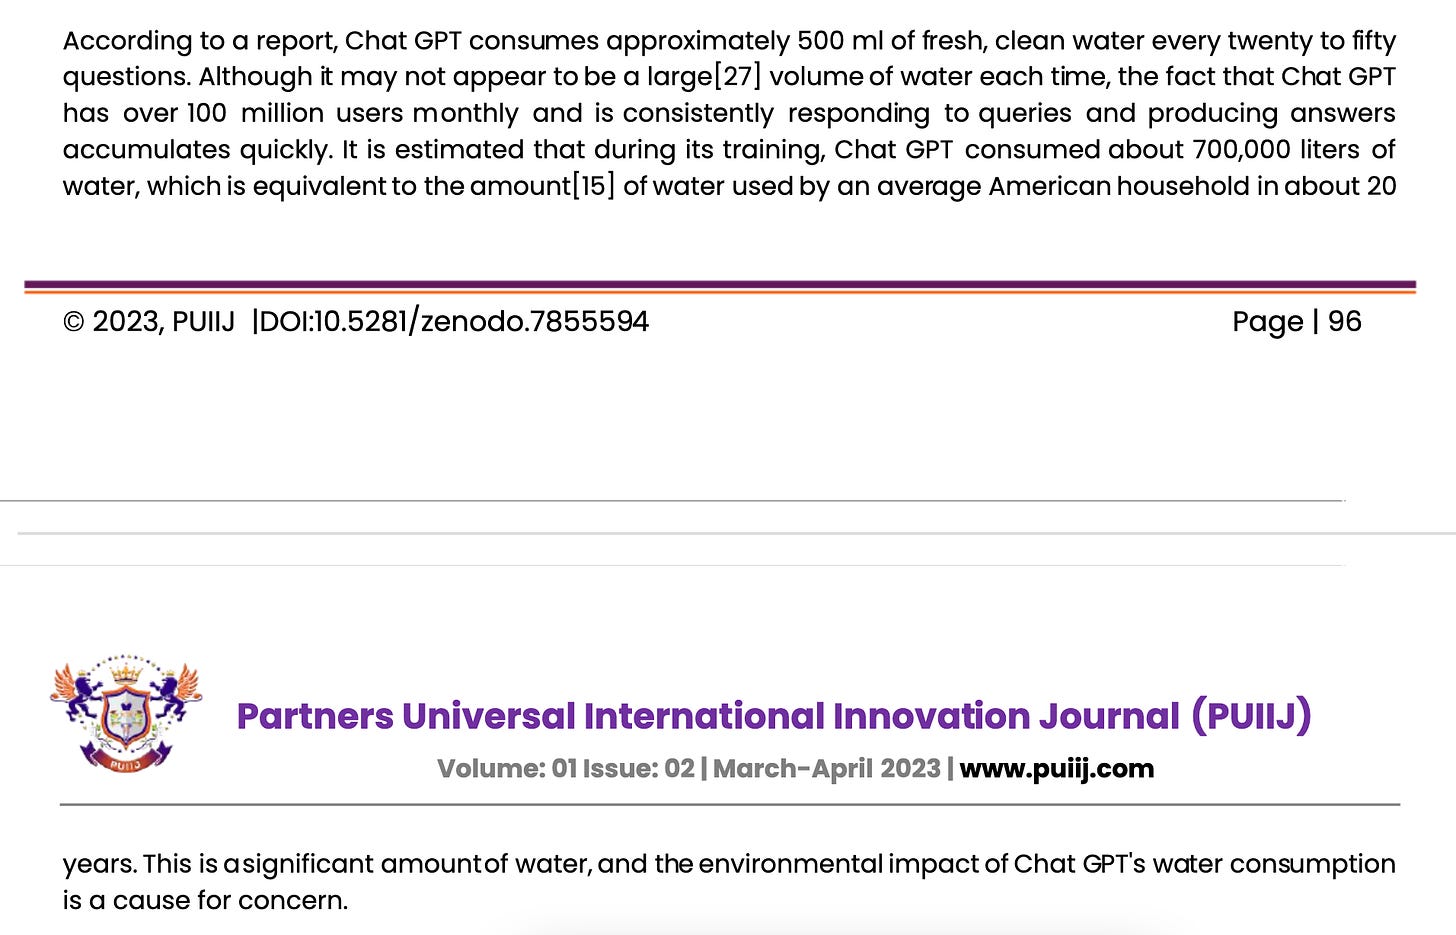 "3.4 What is the extent of water consumption by Chat GPT, and how does it compare to other AI models? Chat GPT, the OpenAI language model, has been making headlines due to its impressive capabilities in natural language processing and machine learning. However, it has also come under scrutiny for its water consumption, and  questions have  been raised  about the  extent of  its water  use compared  to other  AI models. According to a report, Chat GPT consumes approximately 500 ml of fresh, clean water every twenty to fifty questions. Although it may not appear to be a large[27] volume of water each time, the fact that Chat GPT has  over 100  million  users monthly  and  is consistently  responding  to queries  and  producing  answers accumulates quickly. It is estimated that during its training, Chat GPT  consumed about 700,000 liters  of water, which is equivalent to the amount[15] of water used by an average American household in about 20 years". Source linked in caption.